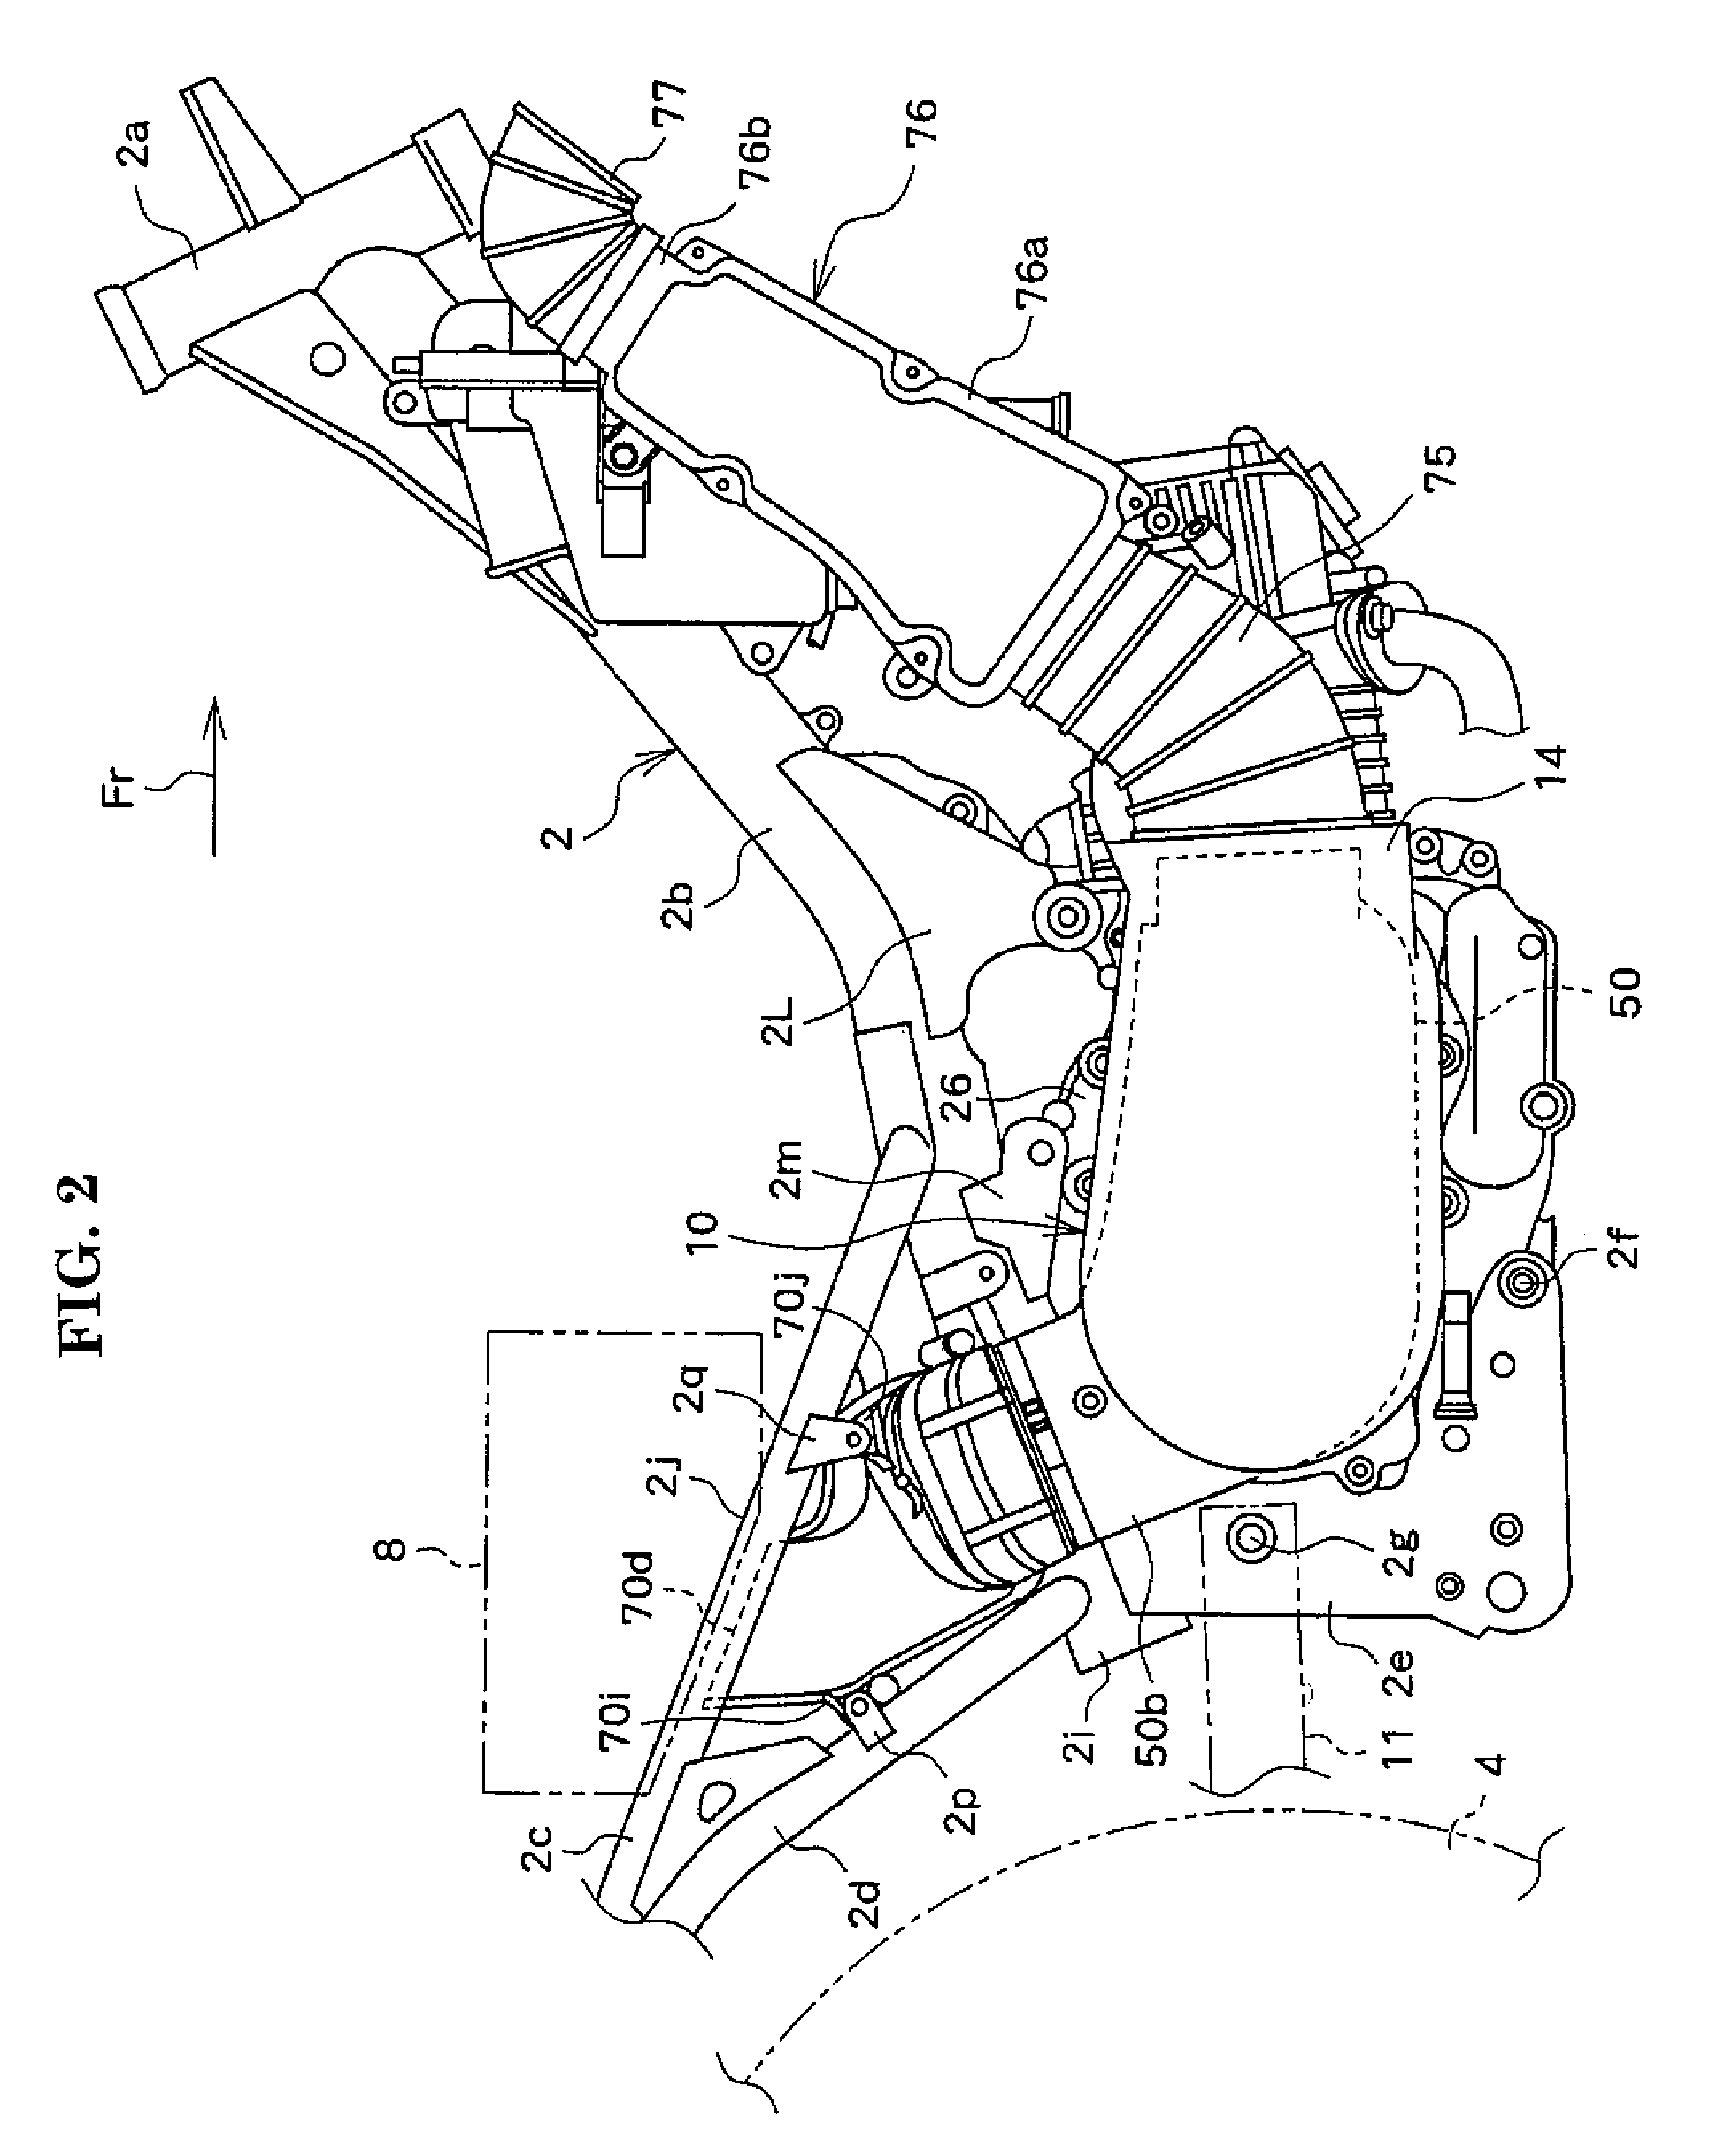 Straddle type vehicle including air exhaust duct for continuously variable transmission